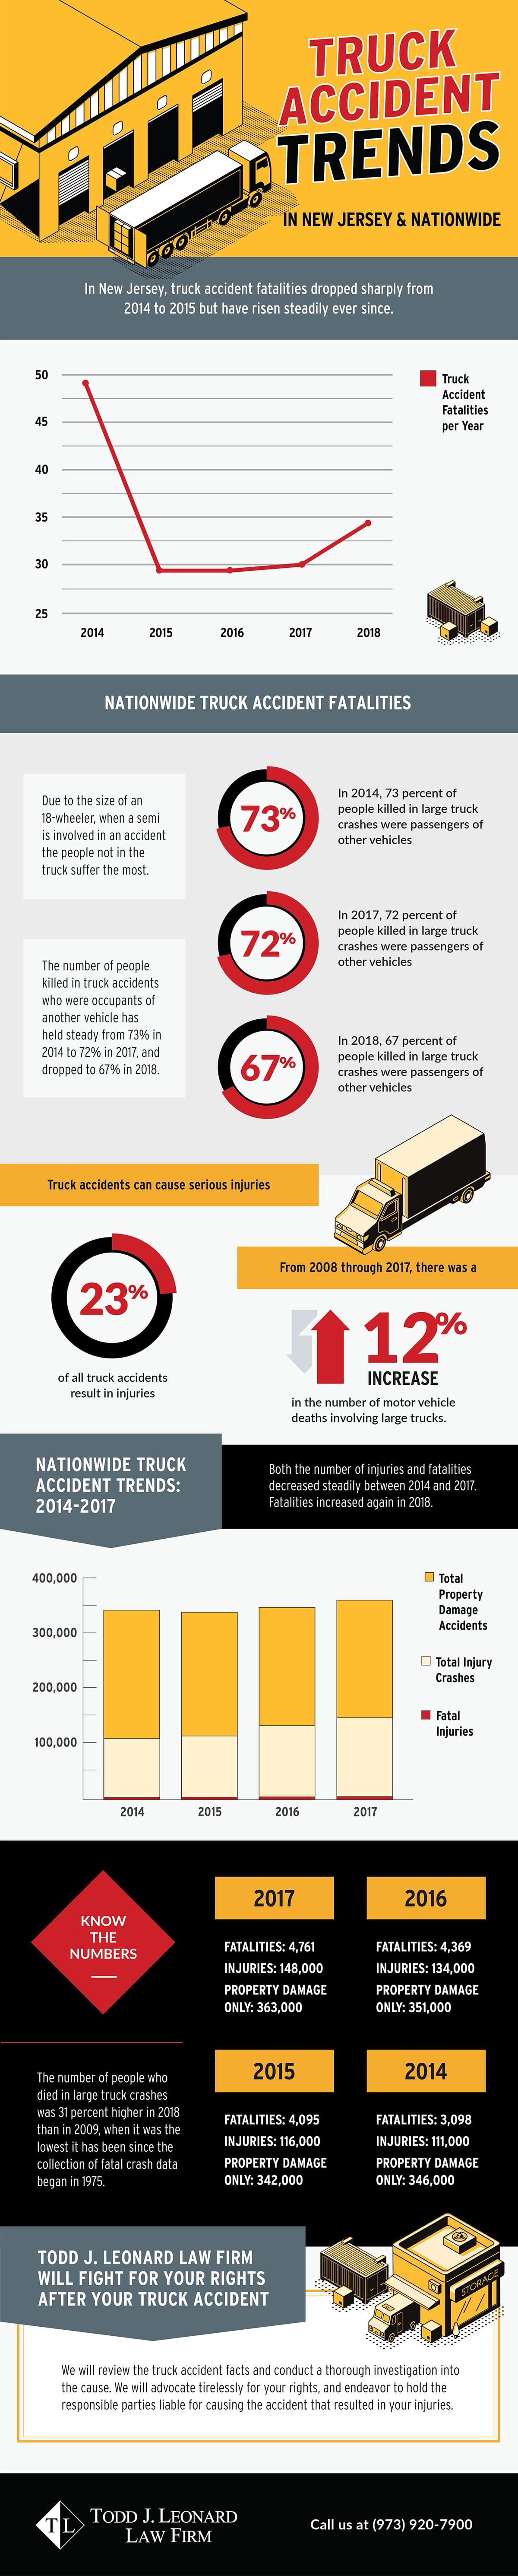 New Jersey Truck Accident Trends